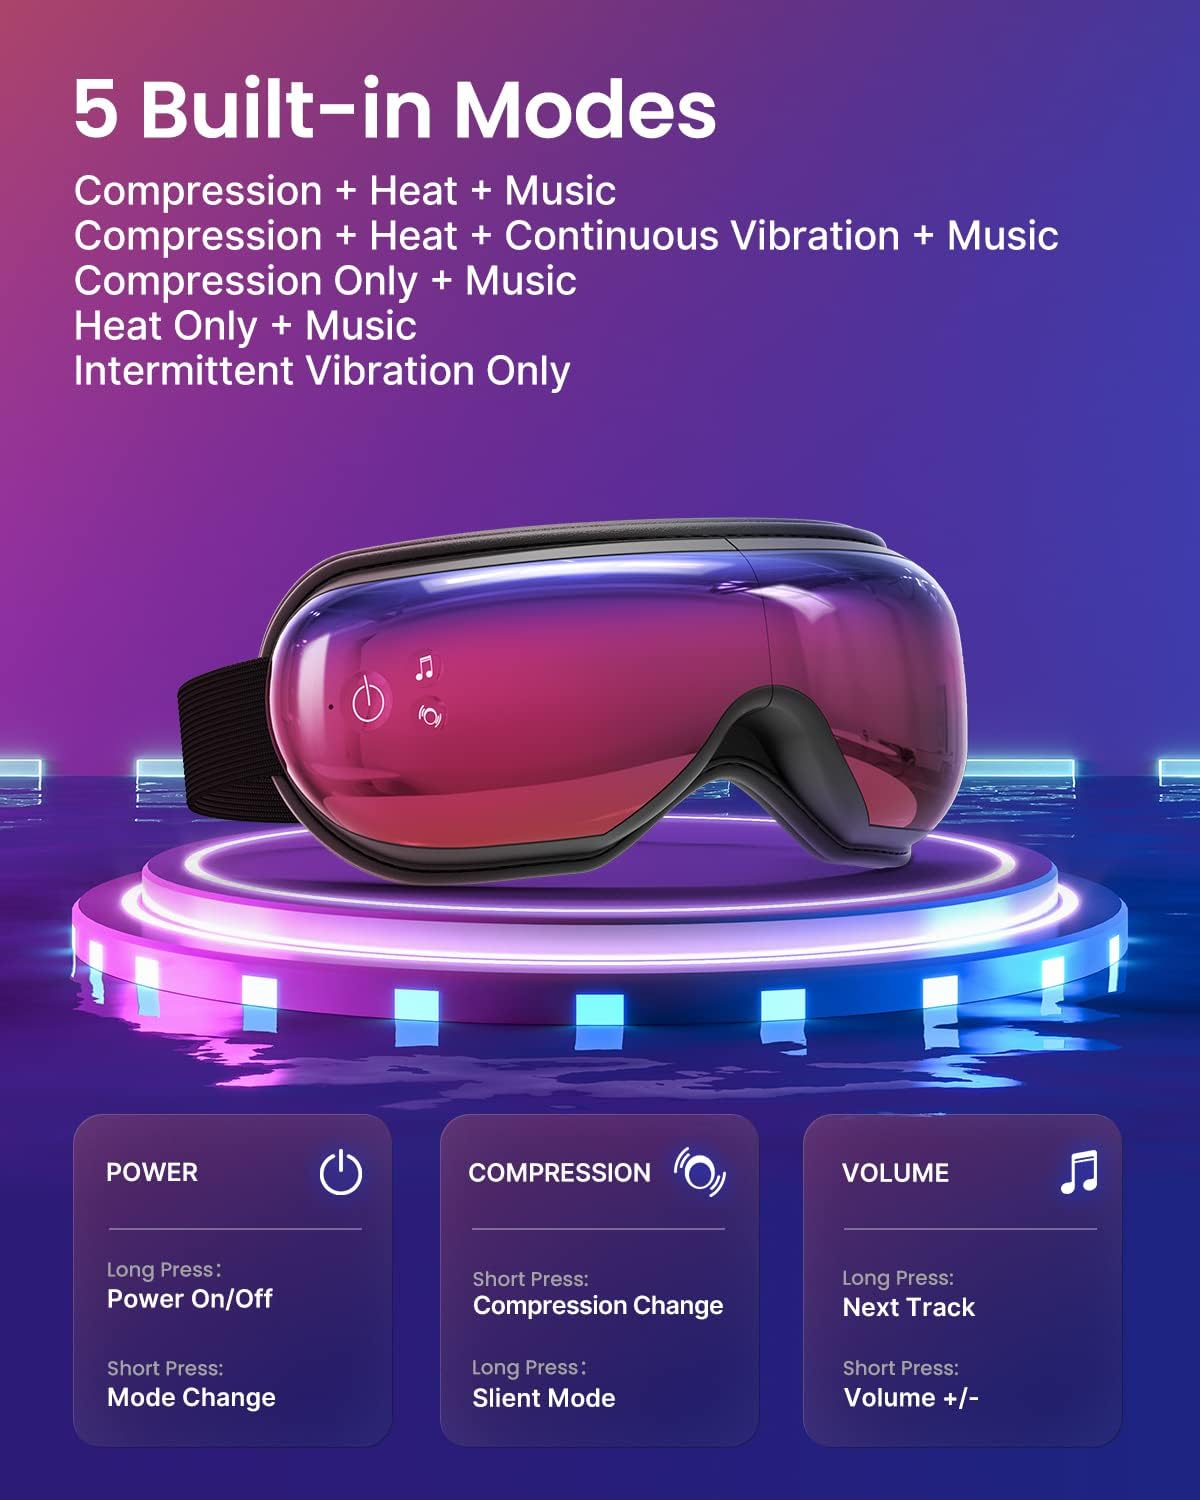 Eye Massager with Heat, Eyeris 1 Eye Mask with Bluetooth Music for Migraine, Heated Eye Care Face Massager, Eye Machine for Relax Eye Strain Dark Circle Eye Bags Dry Eye, Gifts for Women/Men